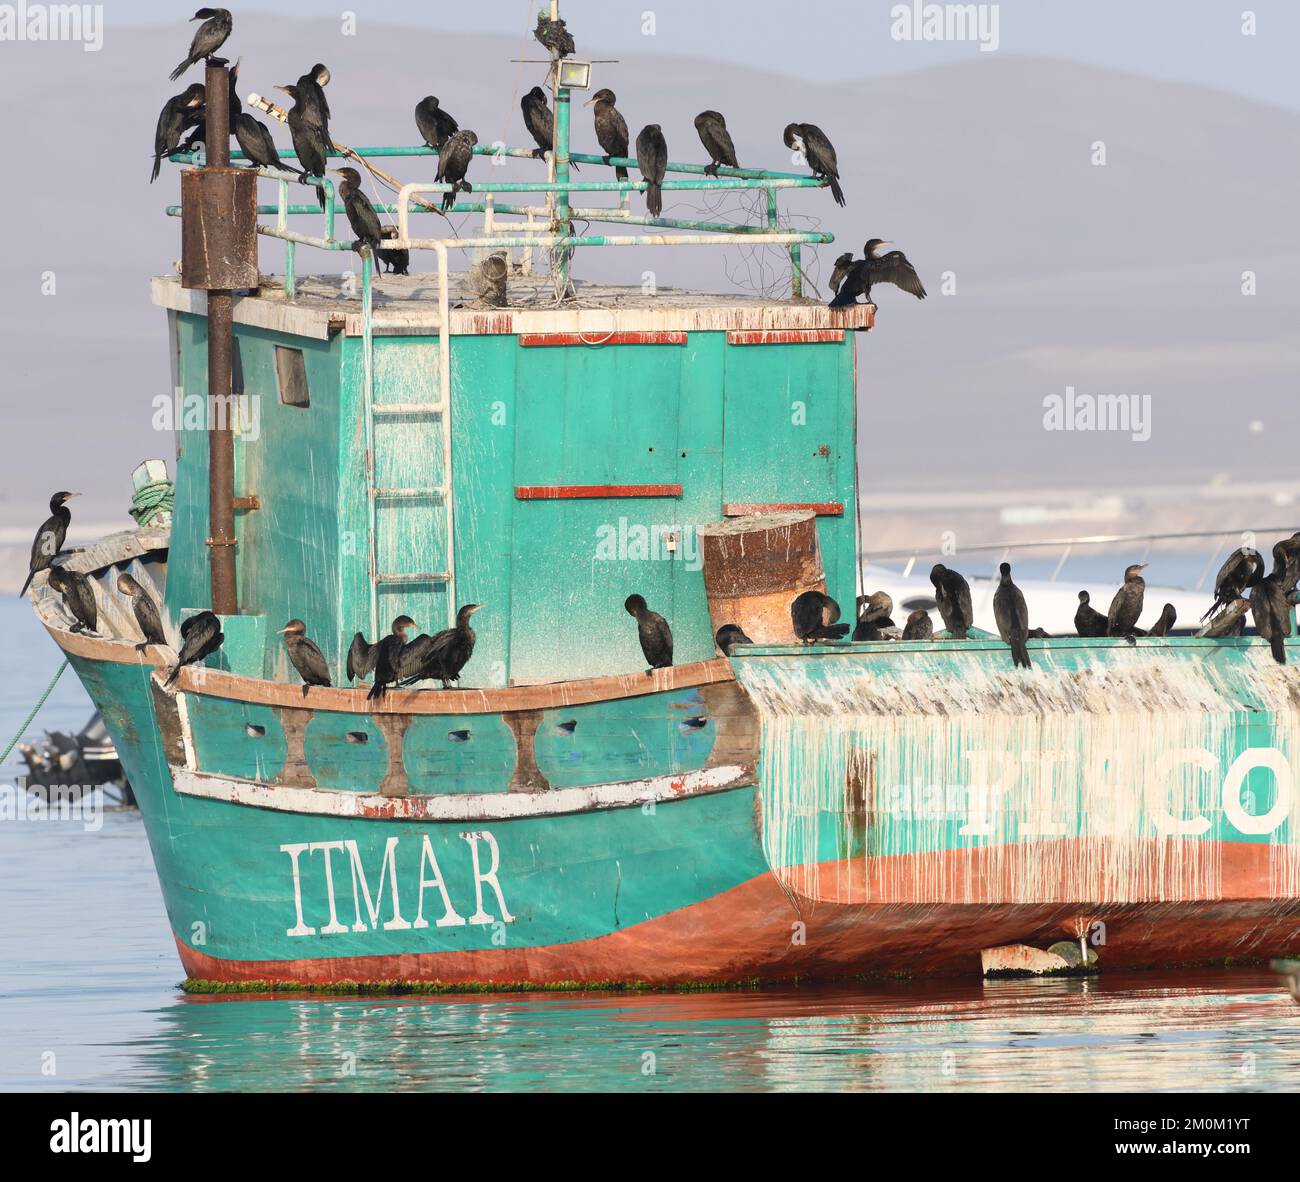 Neotropic cormorants (Nannopterum brasilianum) roost on a boarded-up fishing boat. Paracas, Ica, Peru. Stock Photo